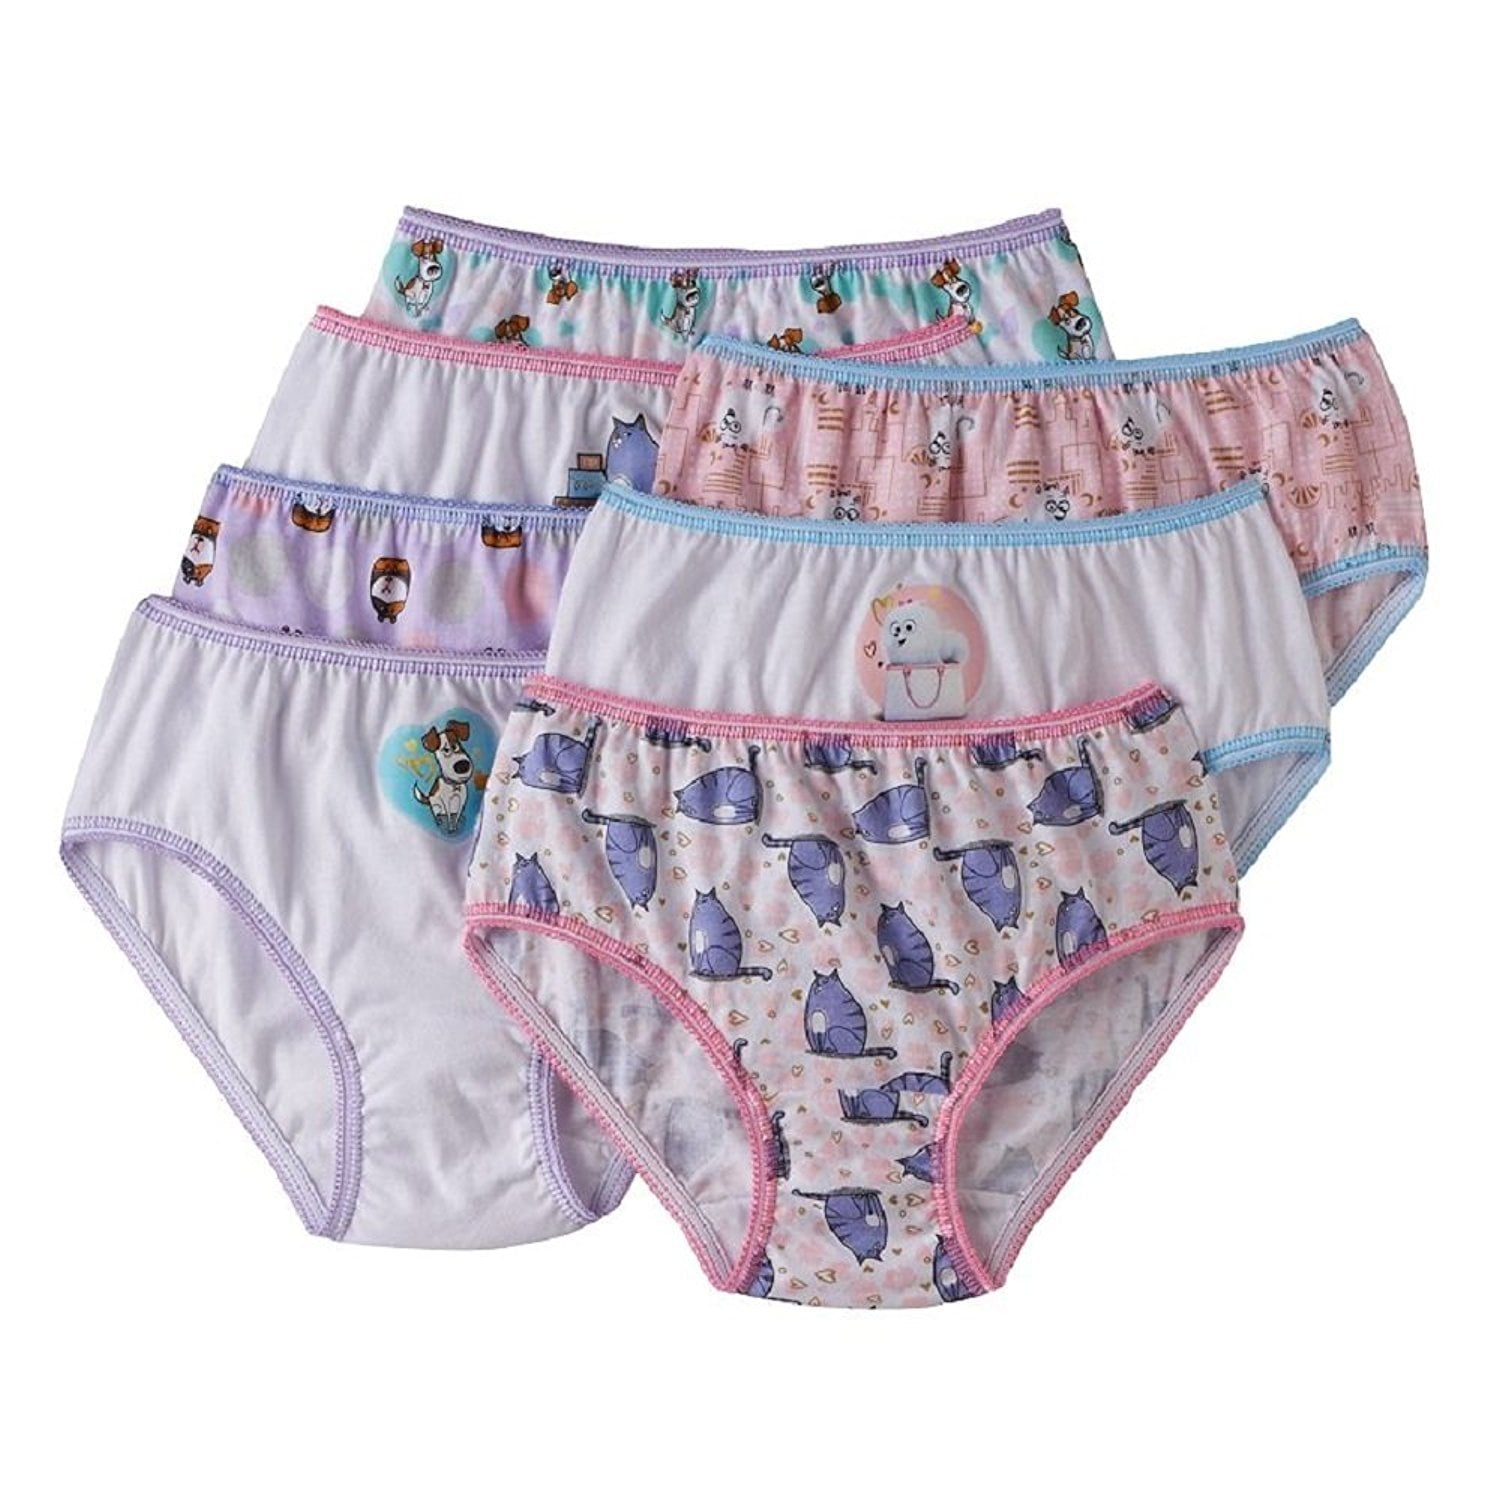 The Secret Life Of Pets Movie Pack of 7 Underwear Size 2T 3T 4T 4